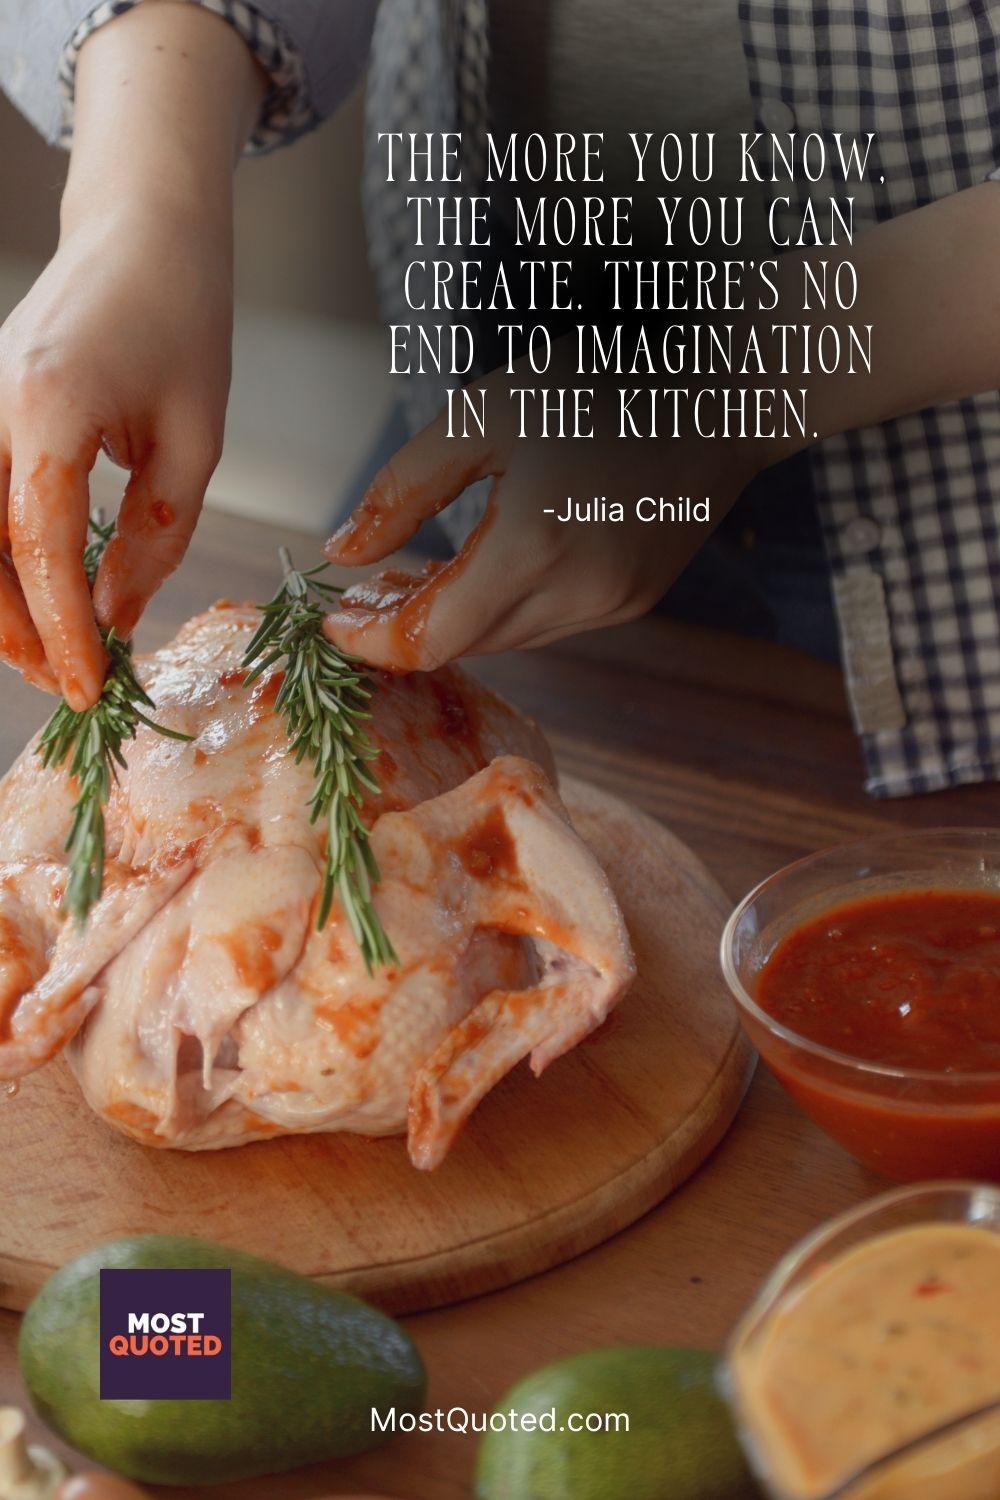 The more you know, the more you can create. There’s no end to imagination in the kitchen. - Julia Child